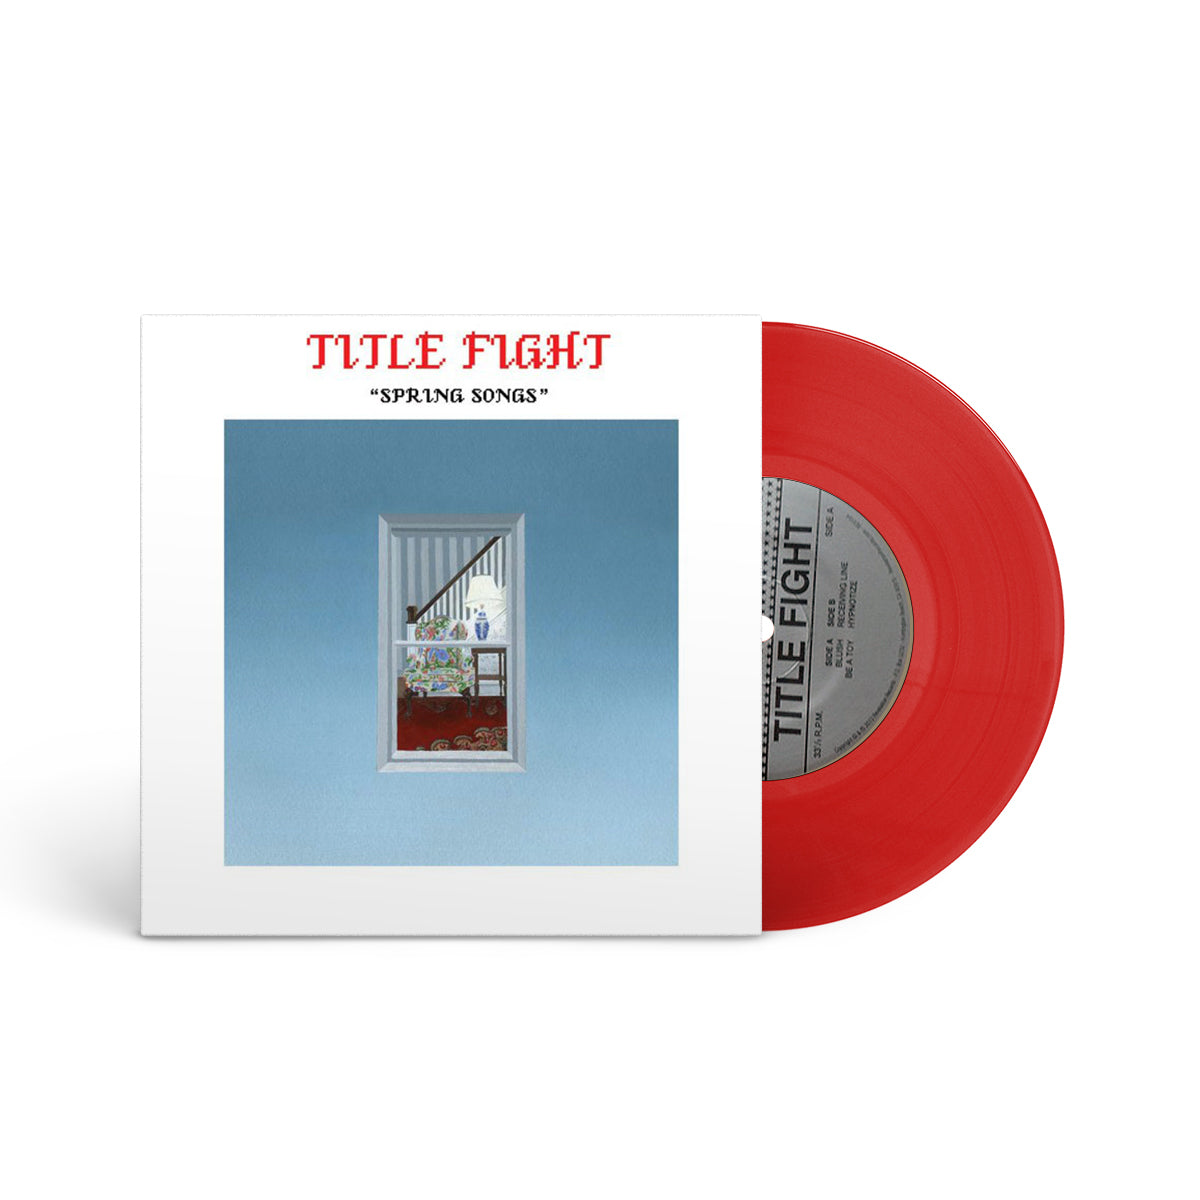 TITLE FIGHT "Spring Songs" 7"